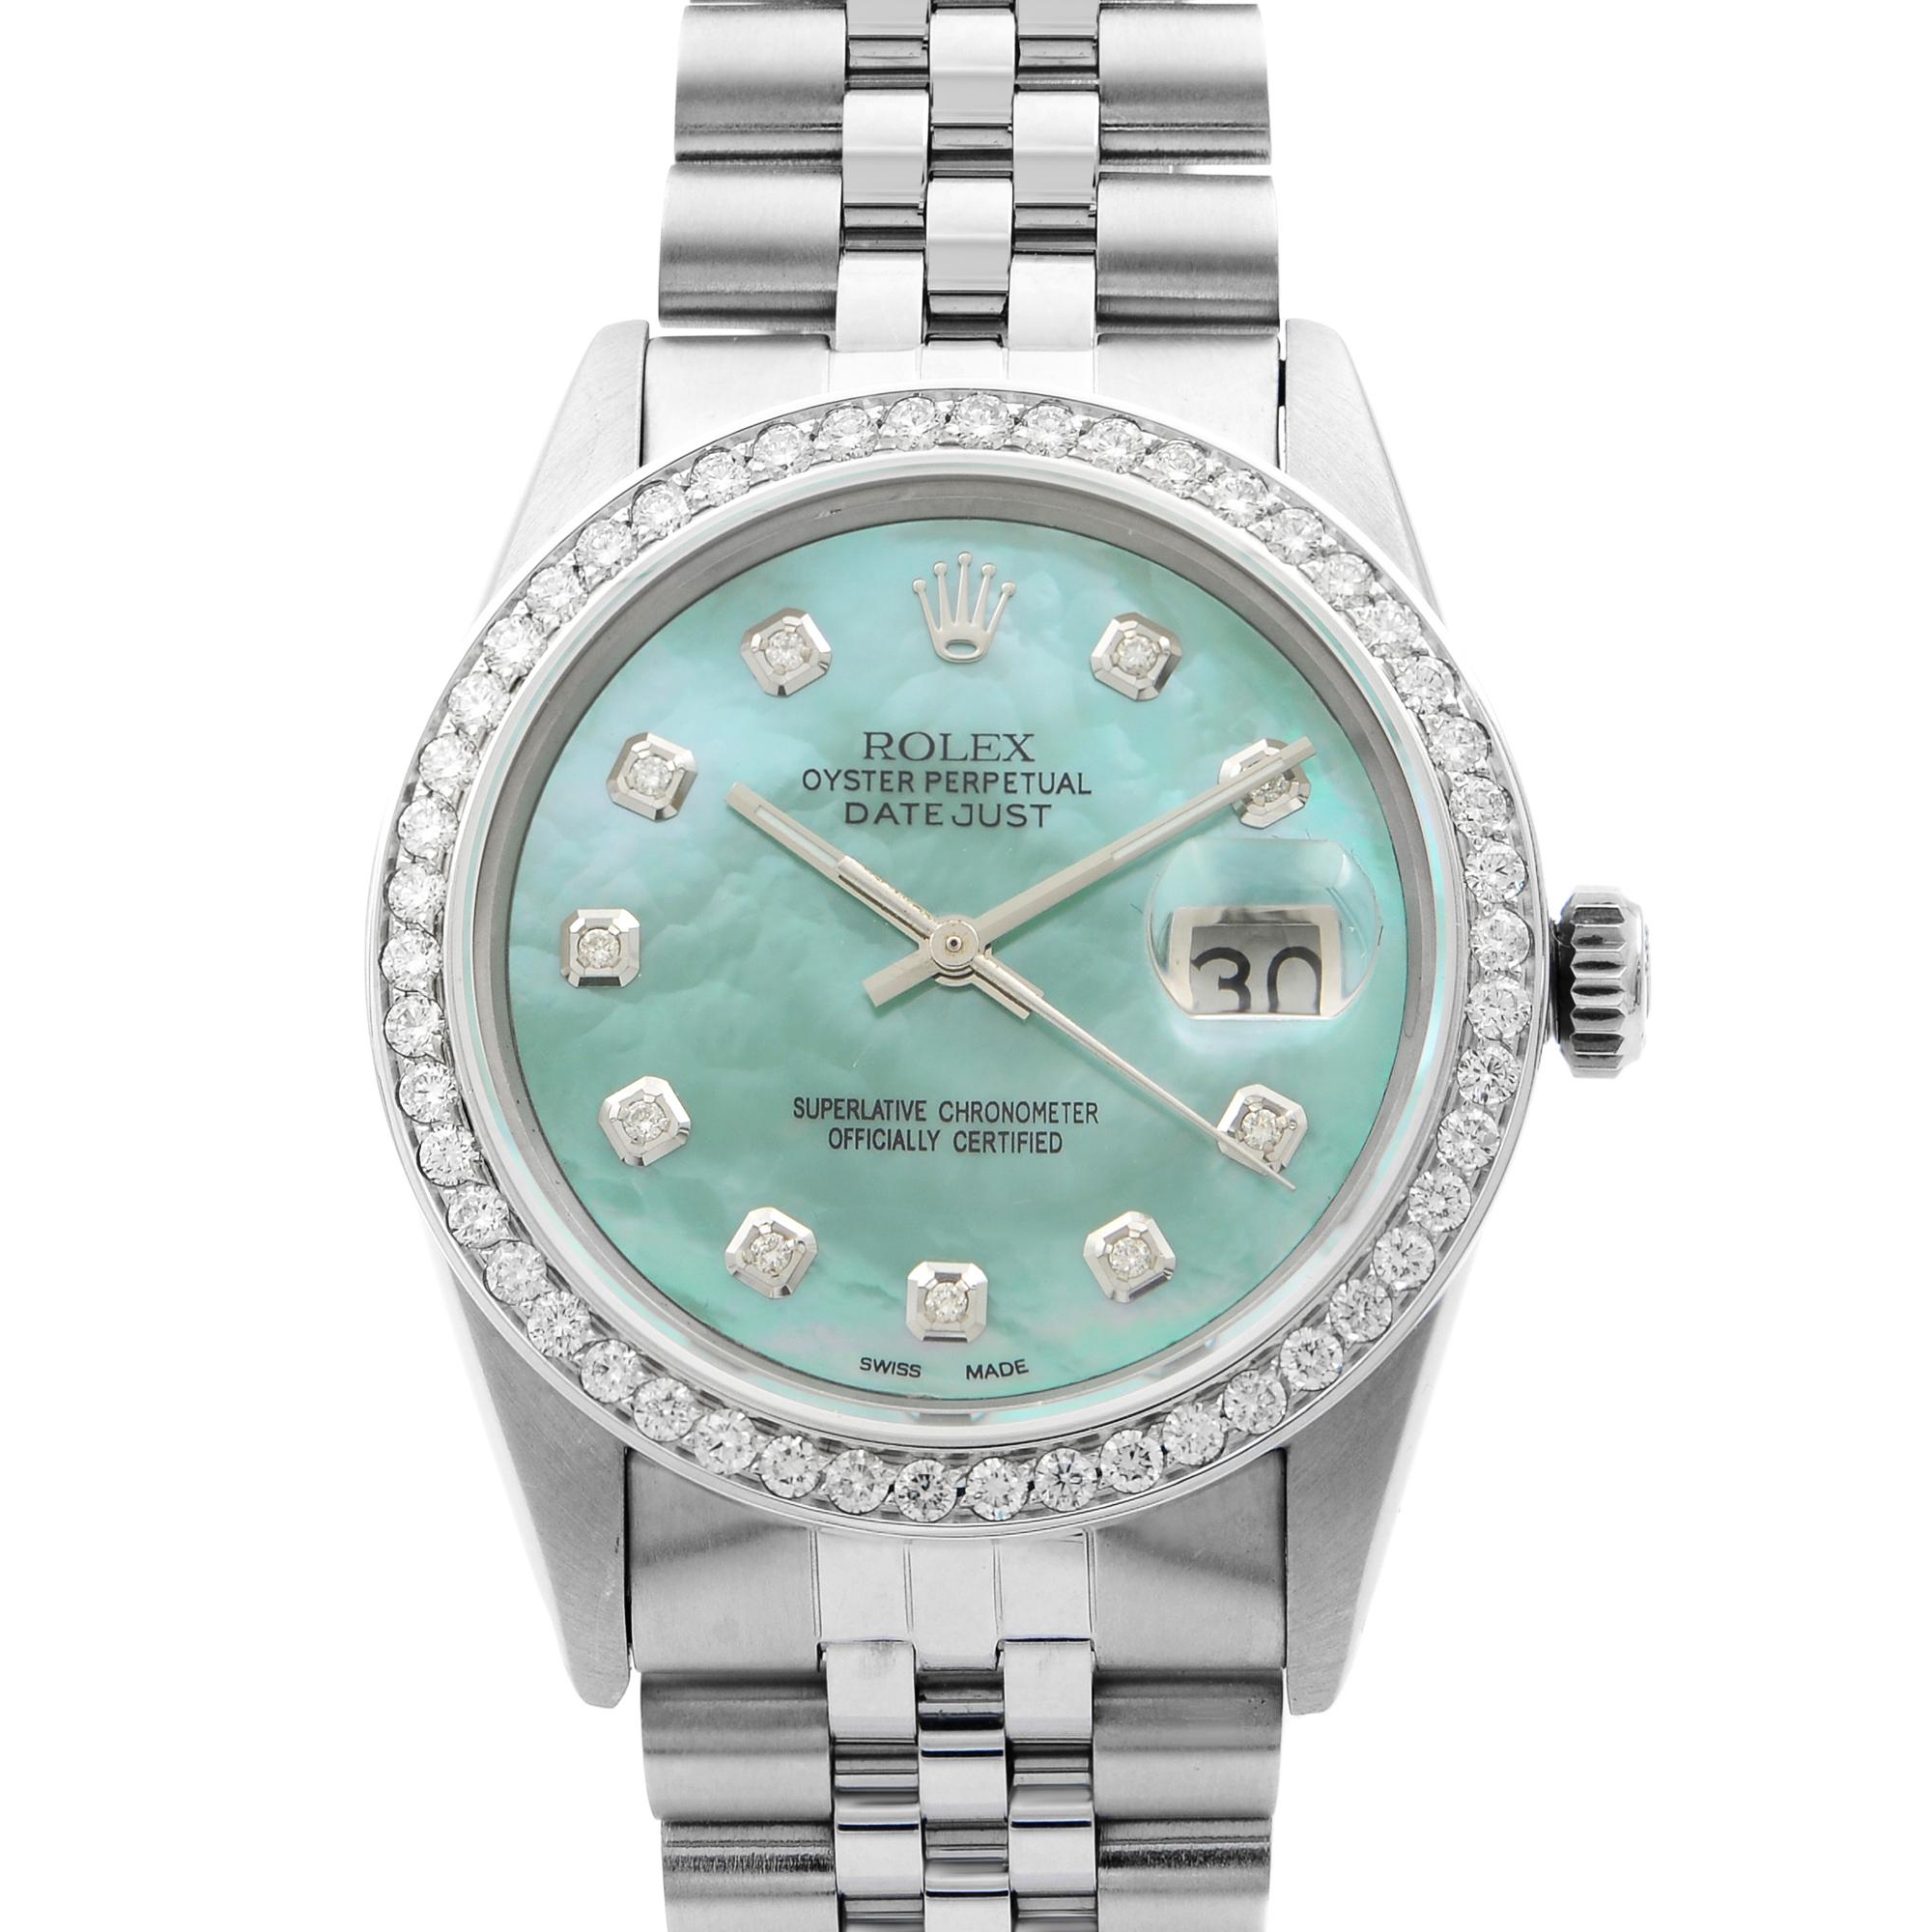 1 Cttw Custom Diamond Bezel and 0.20 Custom Diamond Teal Dial. Original Box and Papers are not included comes with a Chronostore presentation box and authenticity card. Covered by a one-year Chronostore warranty.
Details:
Model